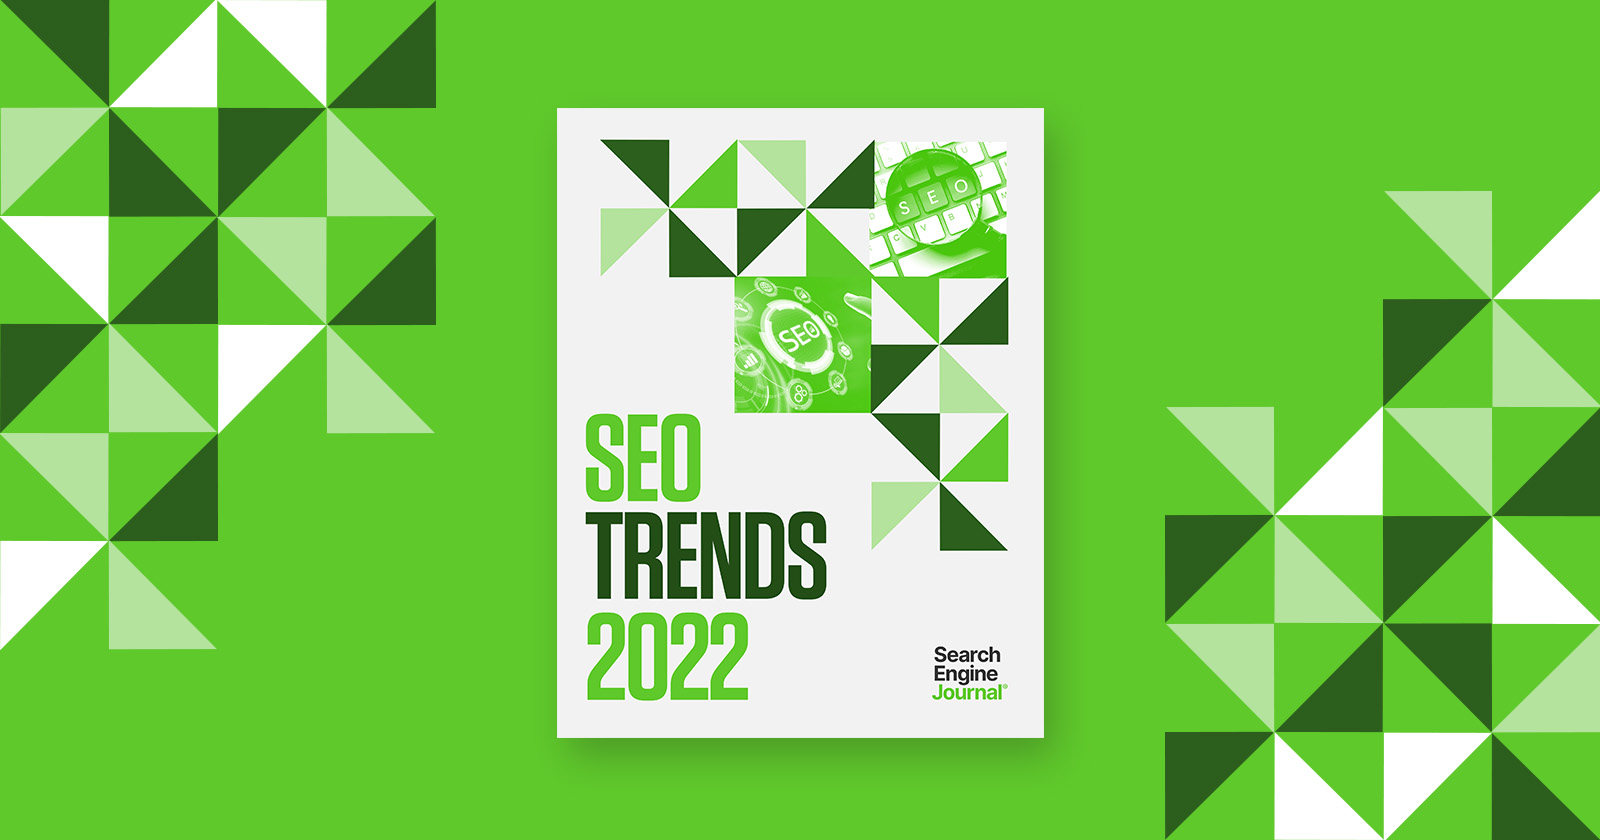 SEO Trends 2022, According to 44 Experts [Ebook]